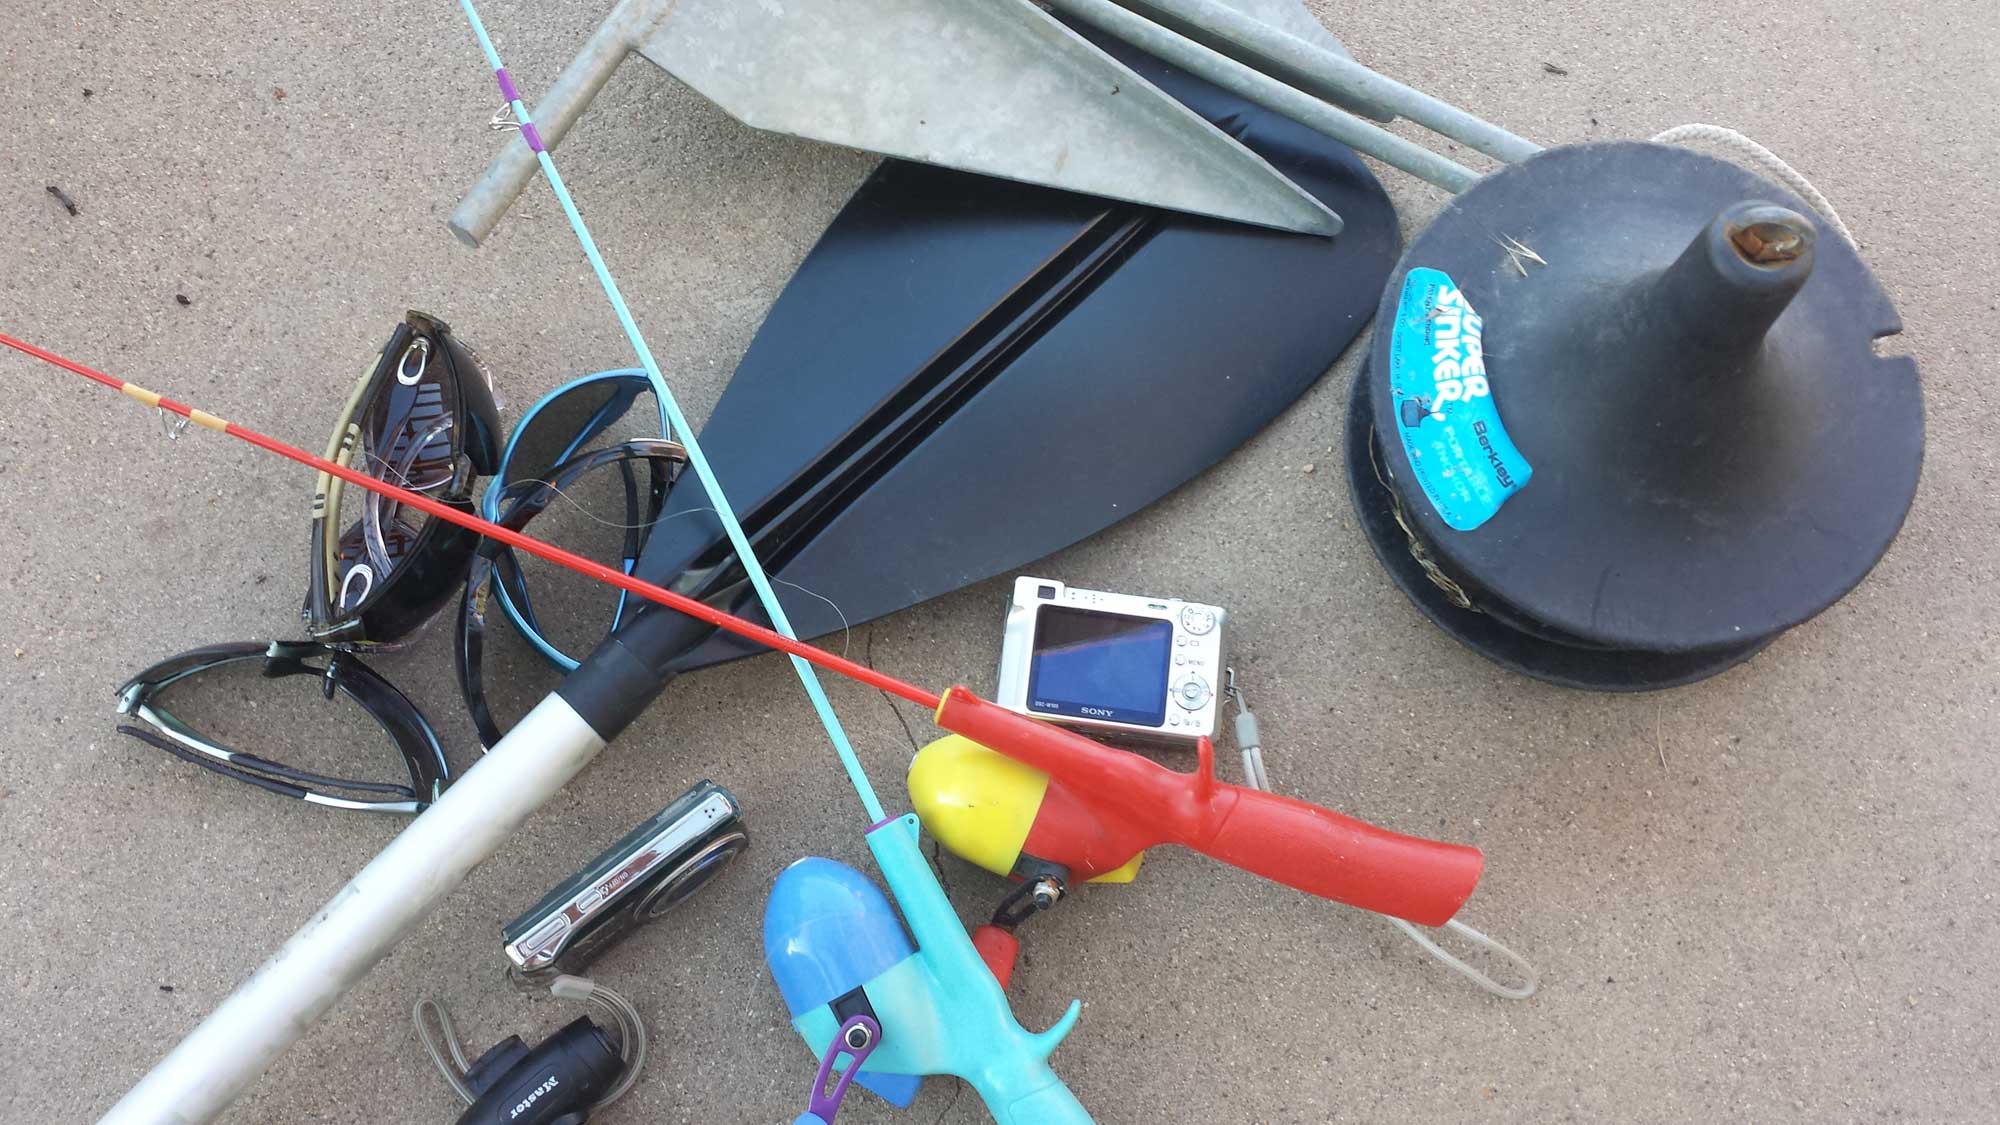 lost and found items - camera, fishing pole, oar, anchor